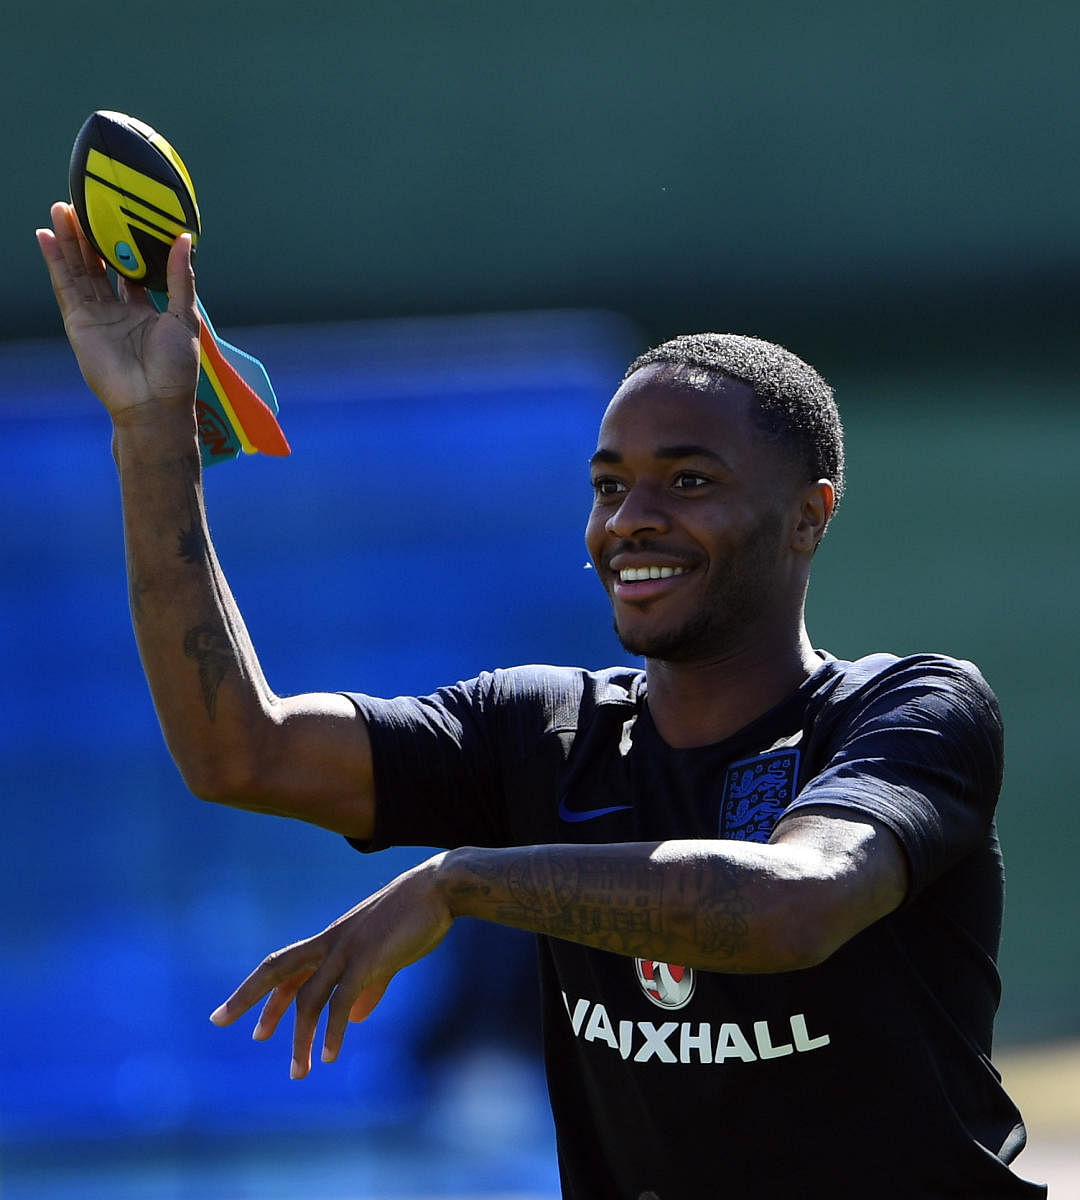 England's Raheem Sterling during a training session in Repino ahead of their Group G clash against Panama on Sunday. AFP